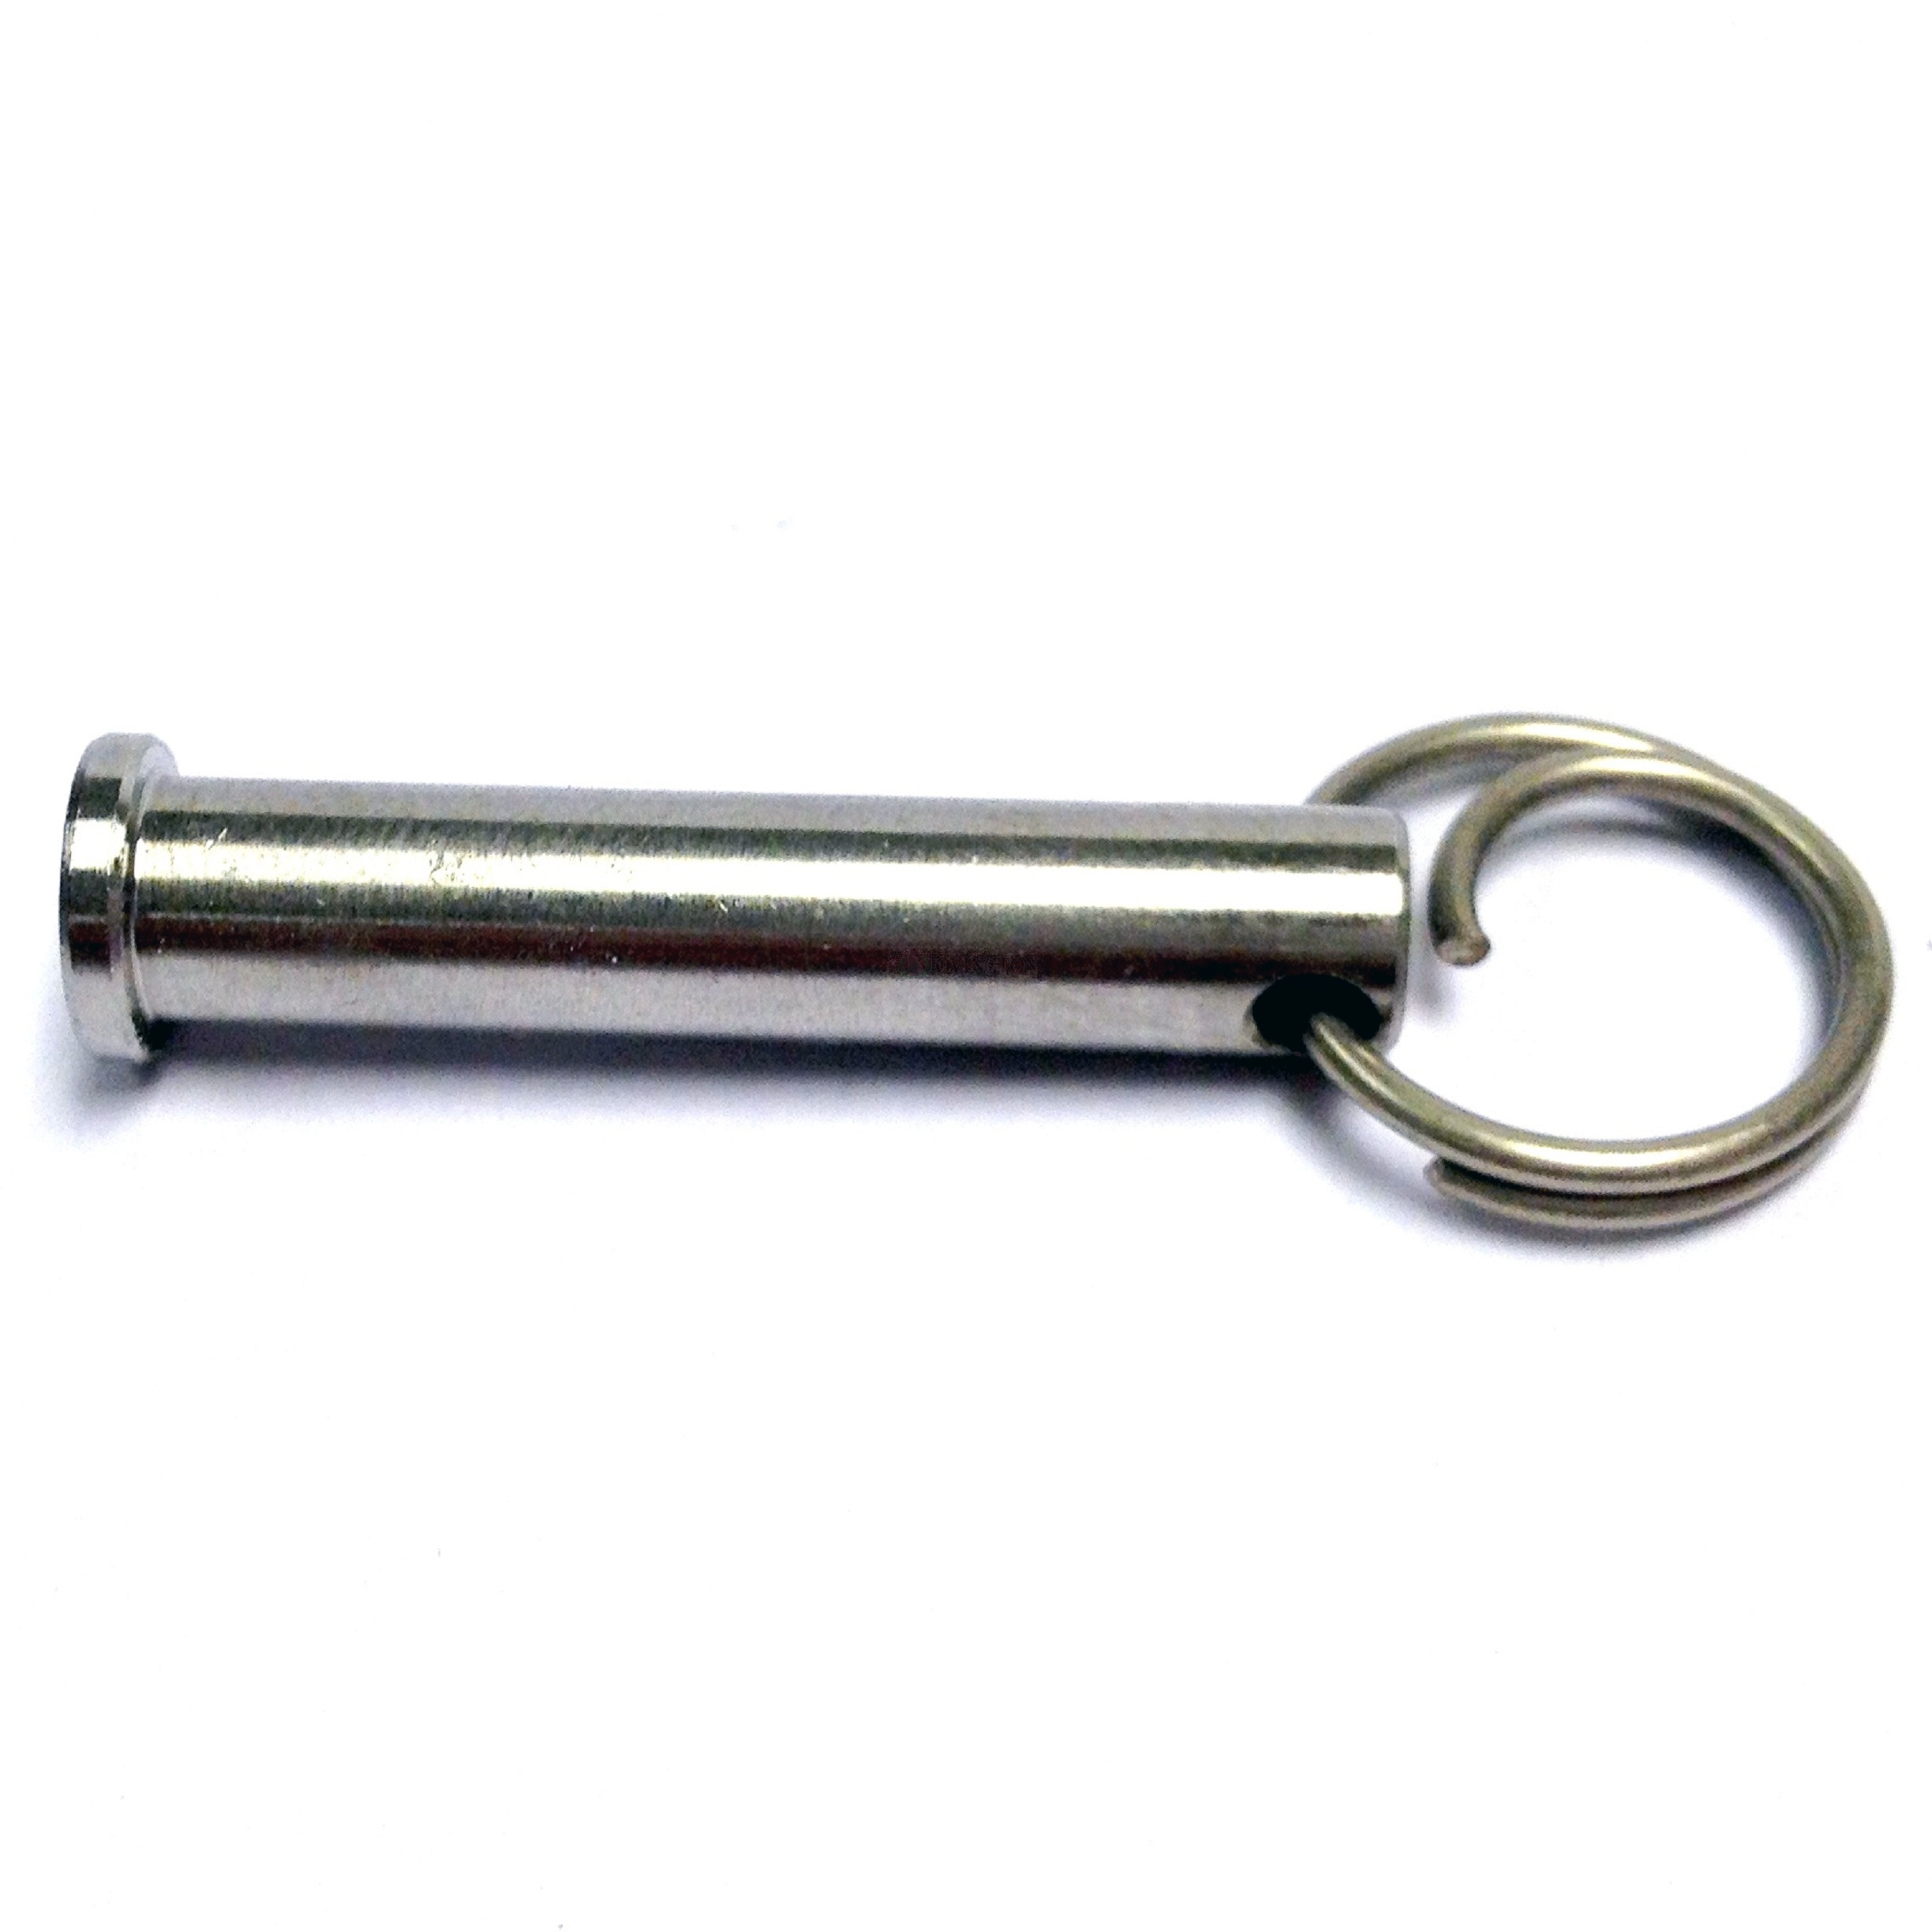 Holt A4 Stainless Steel Clevis Pins Dinghy Range 